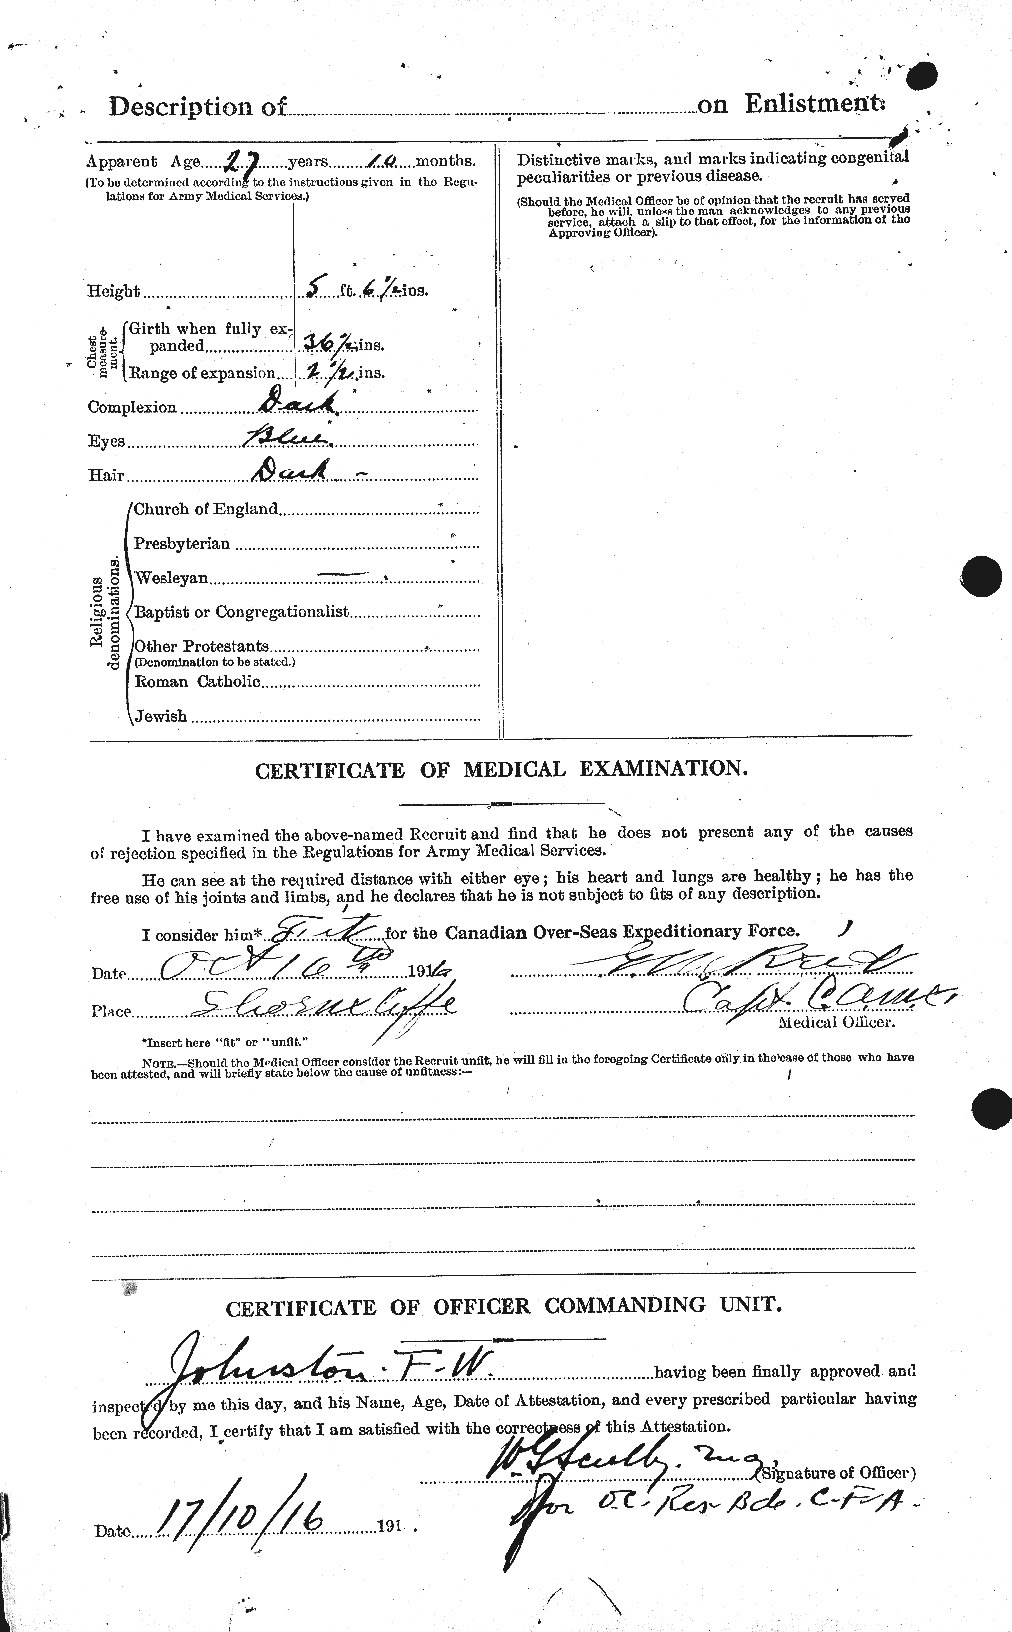 Personnel Records of the First World War - CEF 423304b